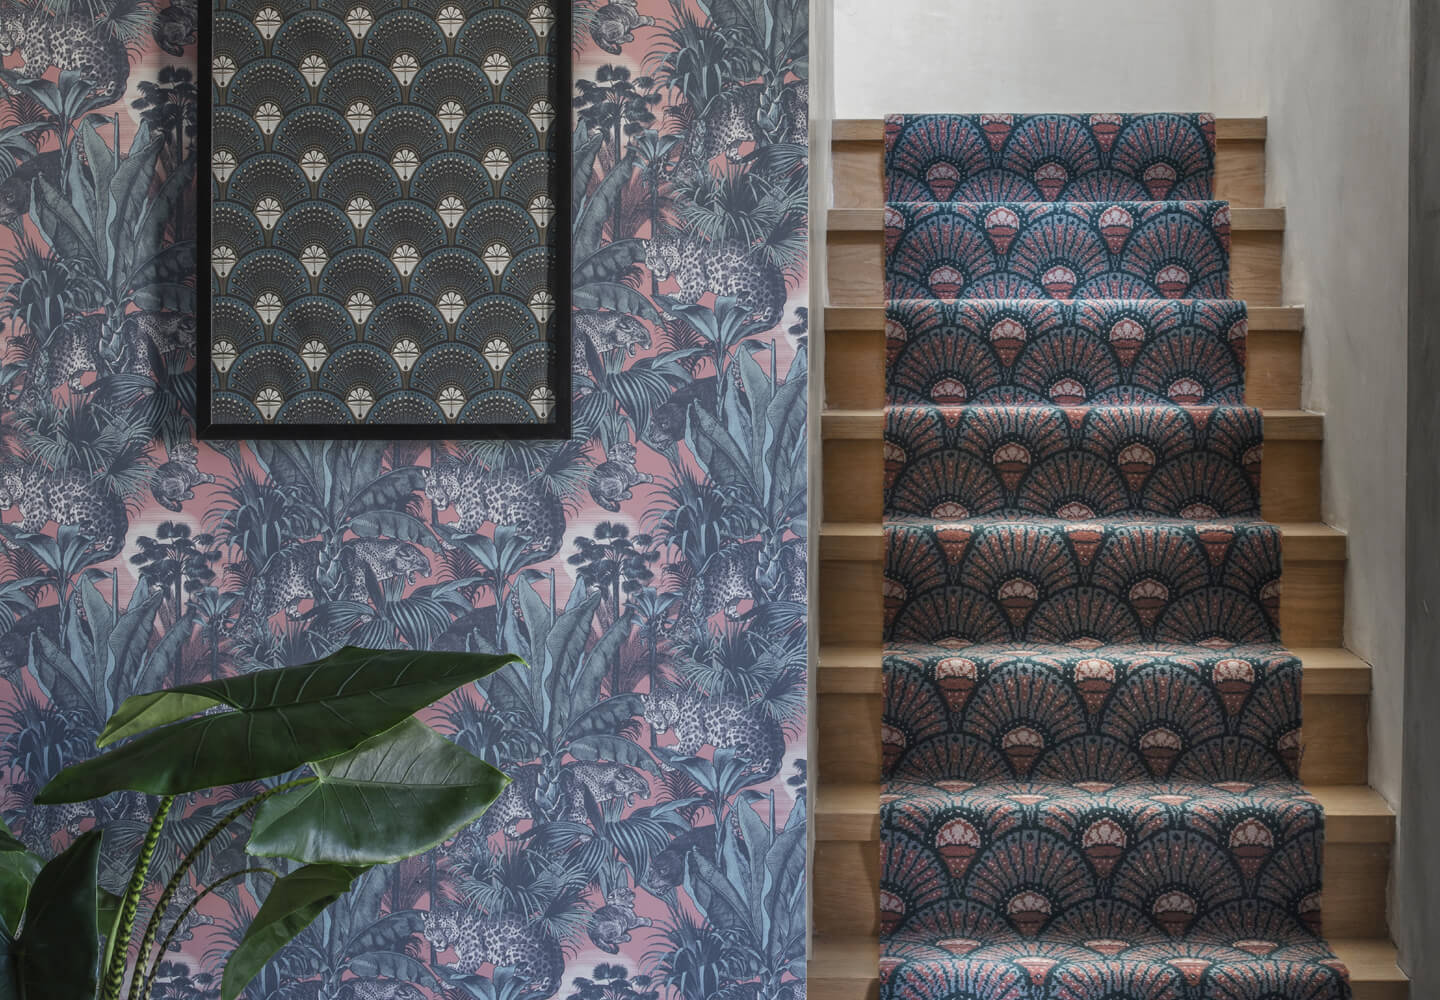 Quirky Deco Blush British Patterned Stair Carpet Runner designed by Divine Savages